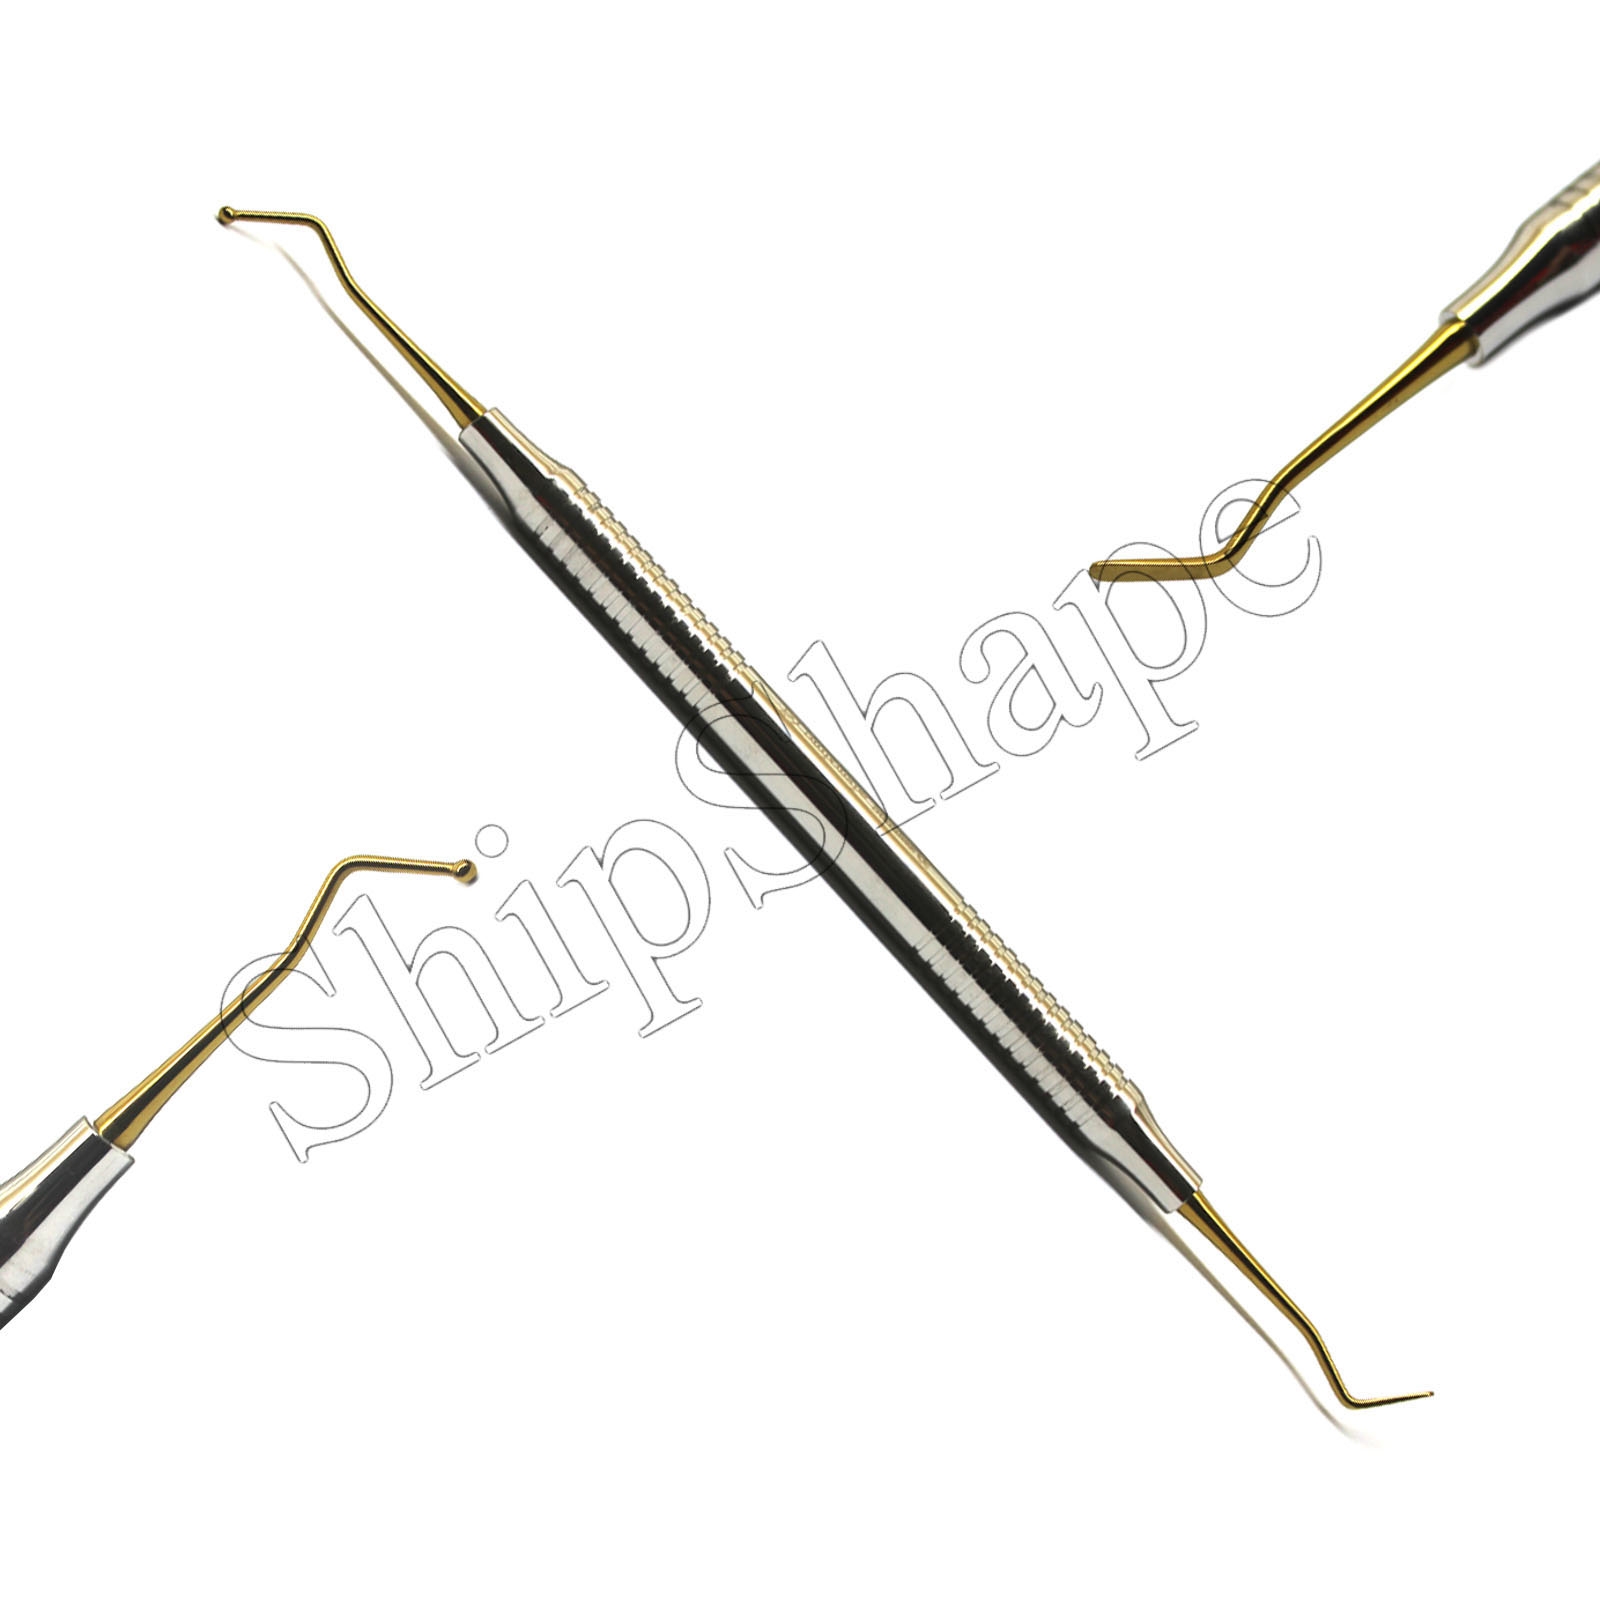 Dental Composite Filling Instruments Titanium Coated Gold Tips Double Ended Scalers - Set of 6-716